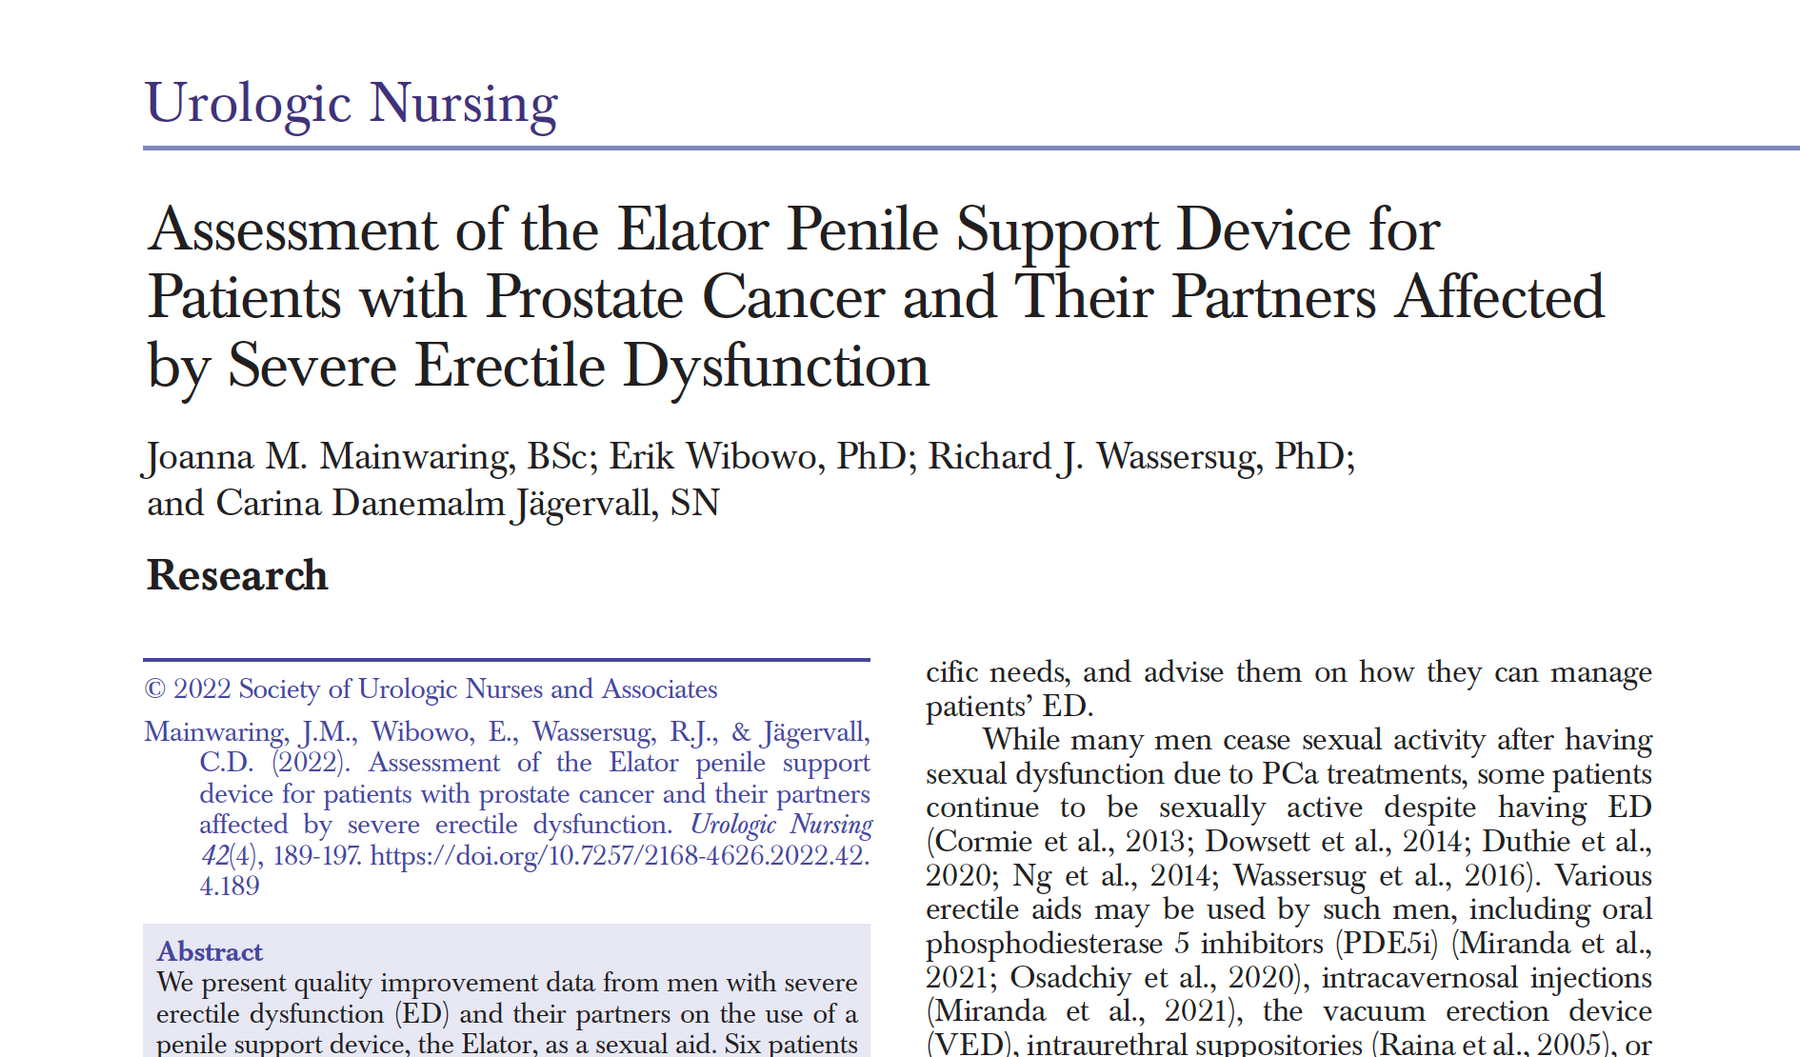 Assessment of the Elator Penile Support Device for Patients with Prostate Cancer and Their Partners Affected by Severe Erectile Dysfunction